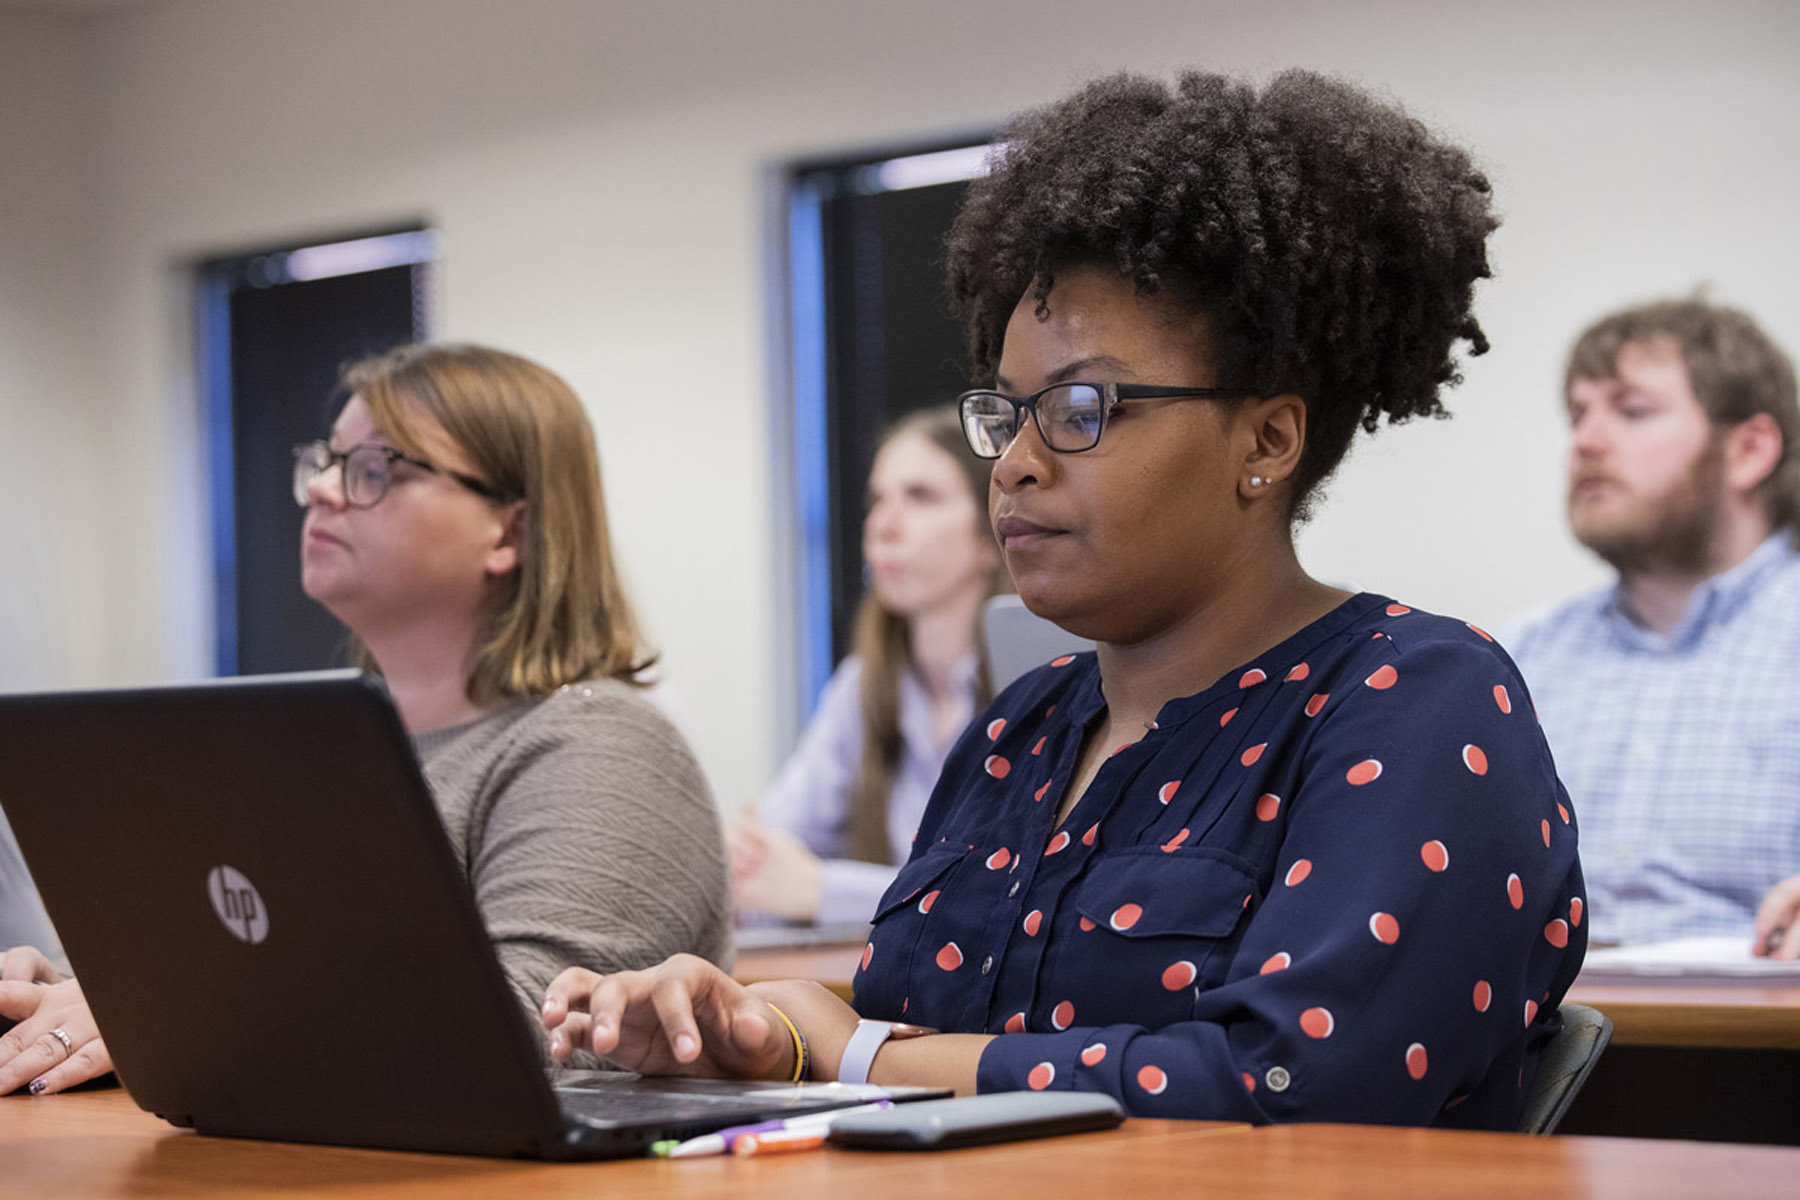 UT Martin combines an interdisciplinary environment with a hands-on approach to learning that will prepare you to hit the ground running after graduation.